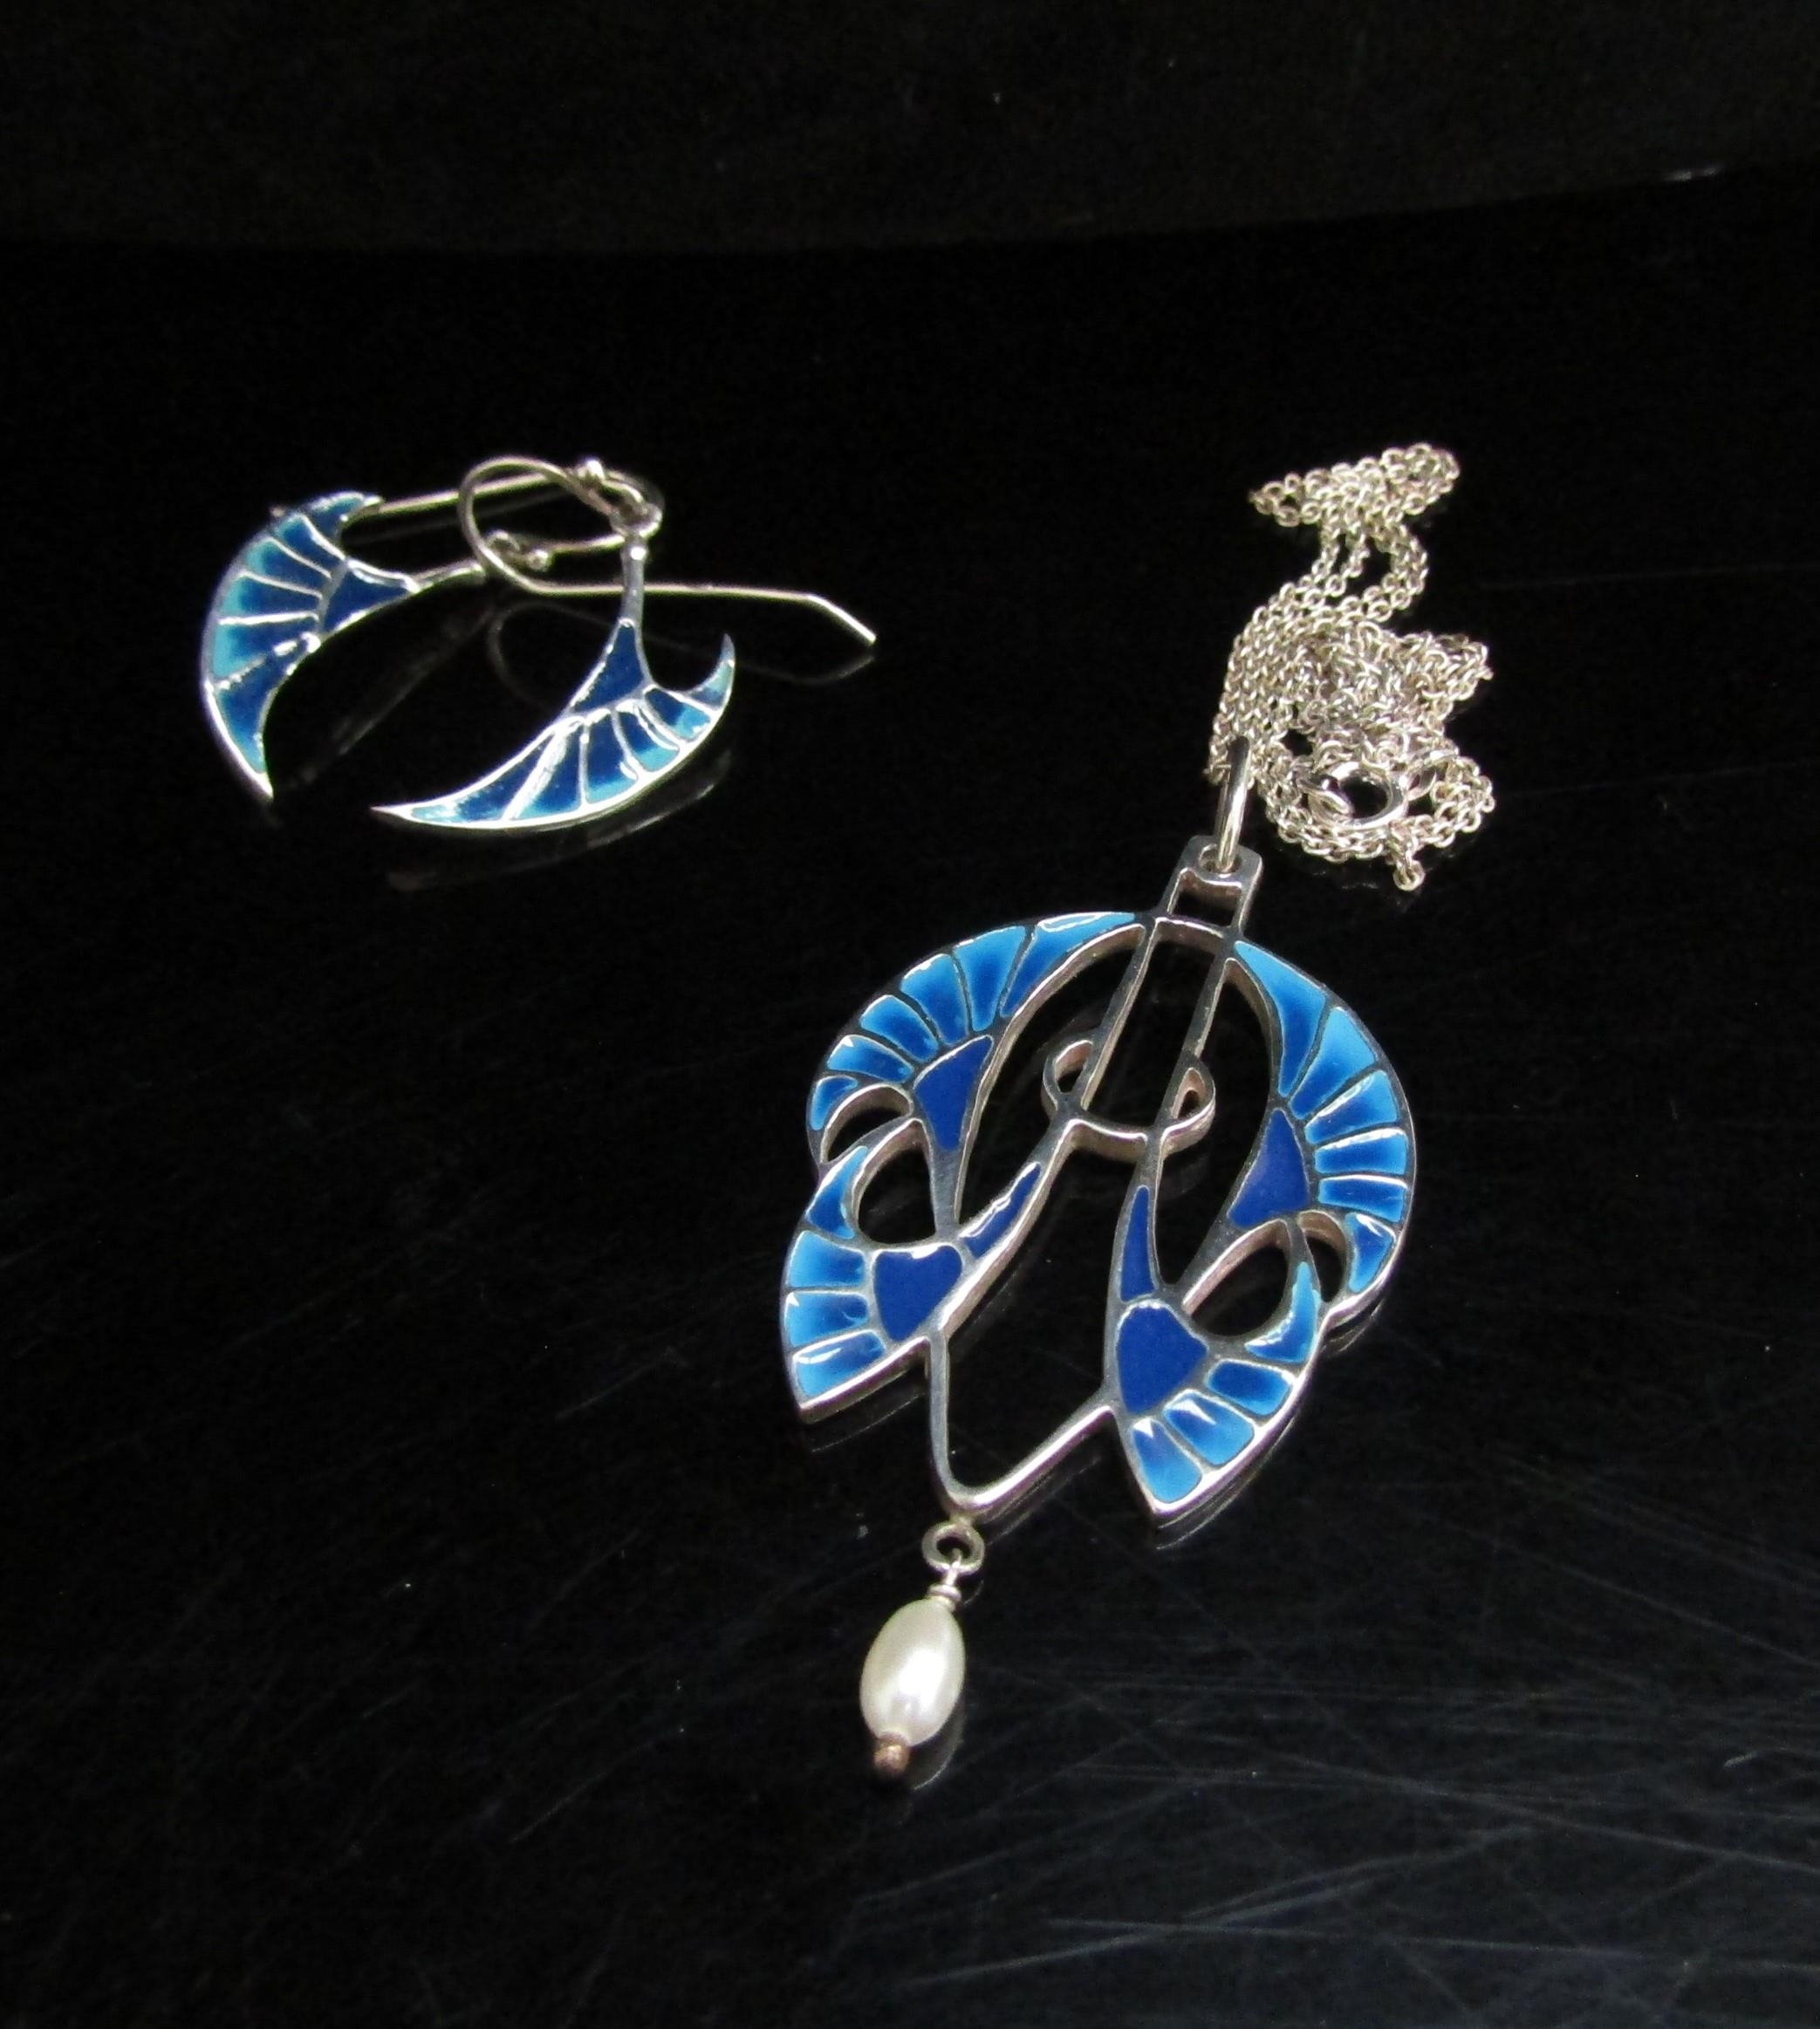 An Art Nouveau revival silver and enamel pendant necklace with pearl drop, and matching earrings - Image 2 of 2